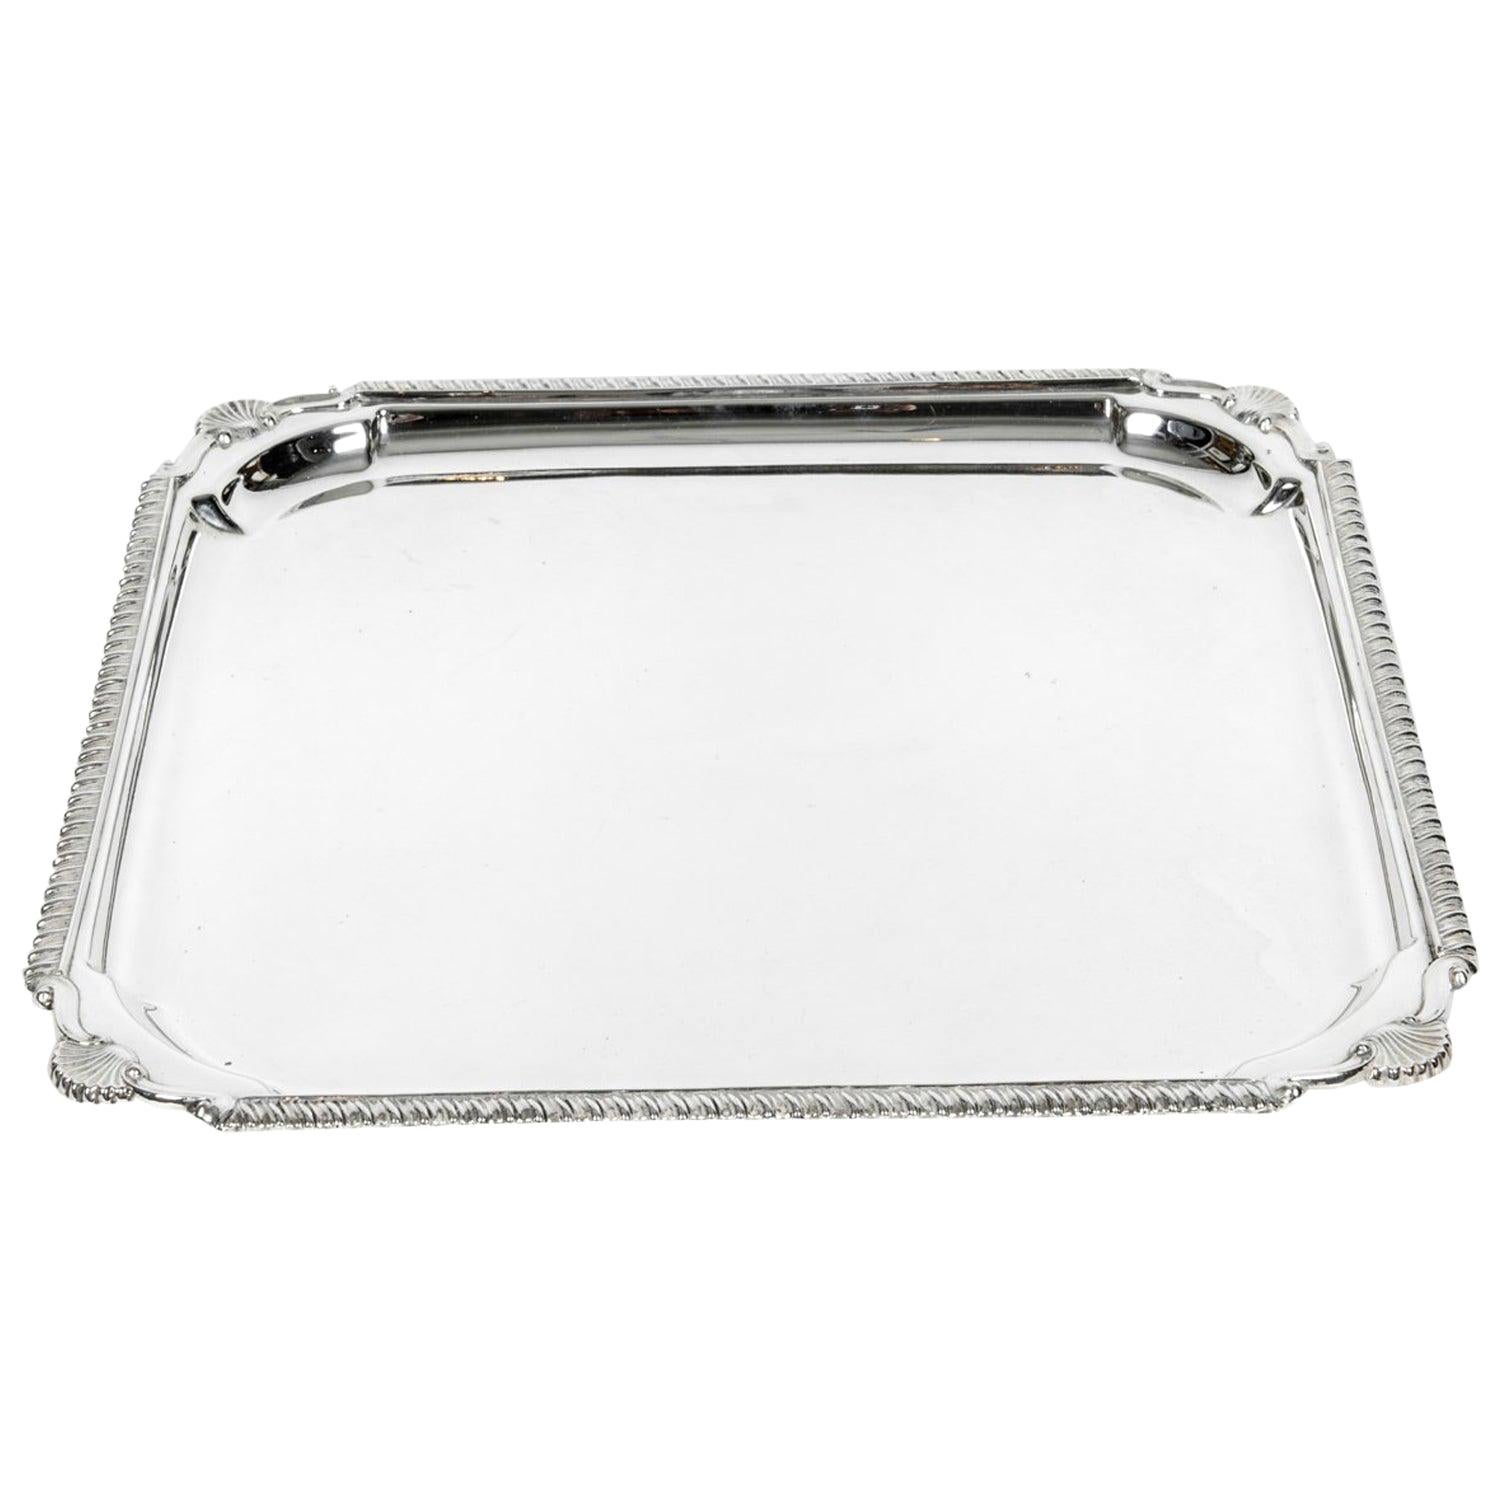 English Silver Plate Barware / Tableware Serving Footed Tray